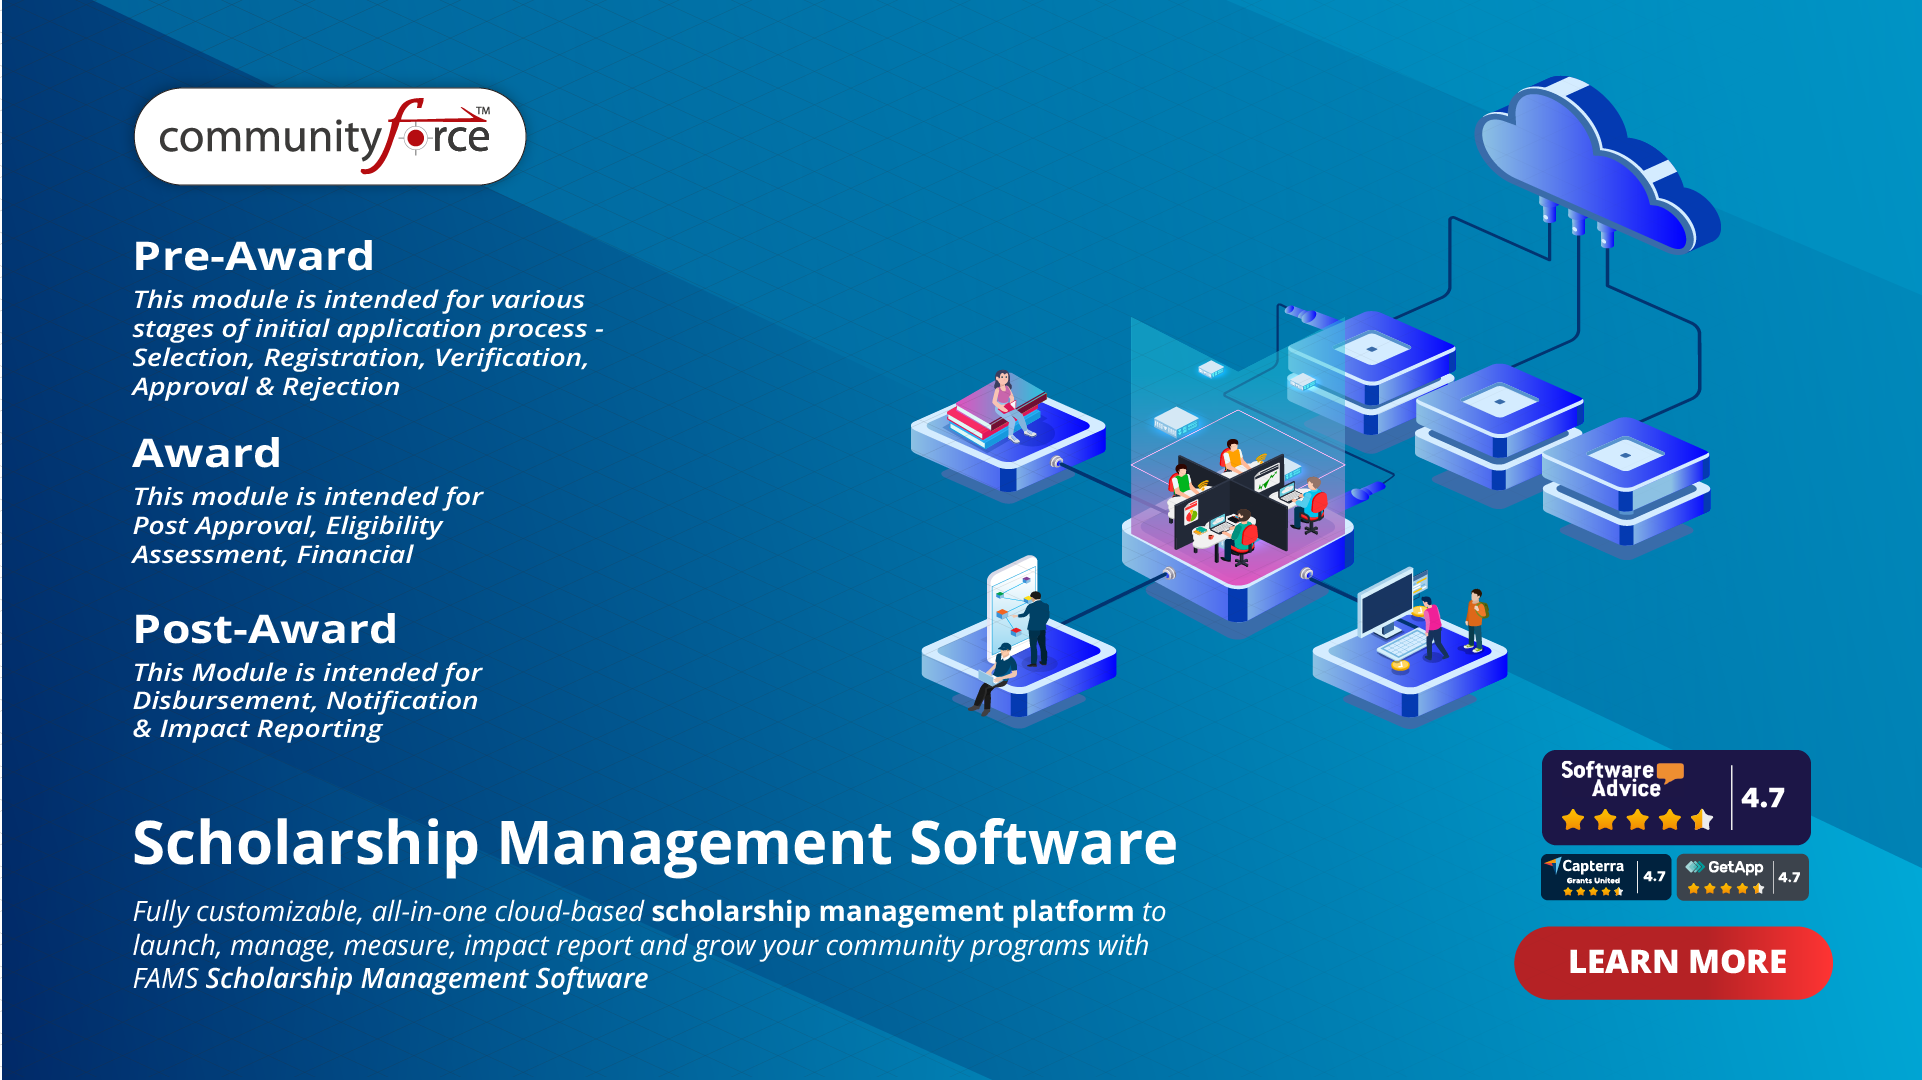 Scholarship Management Software by CommunityForce